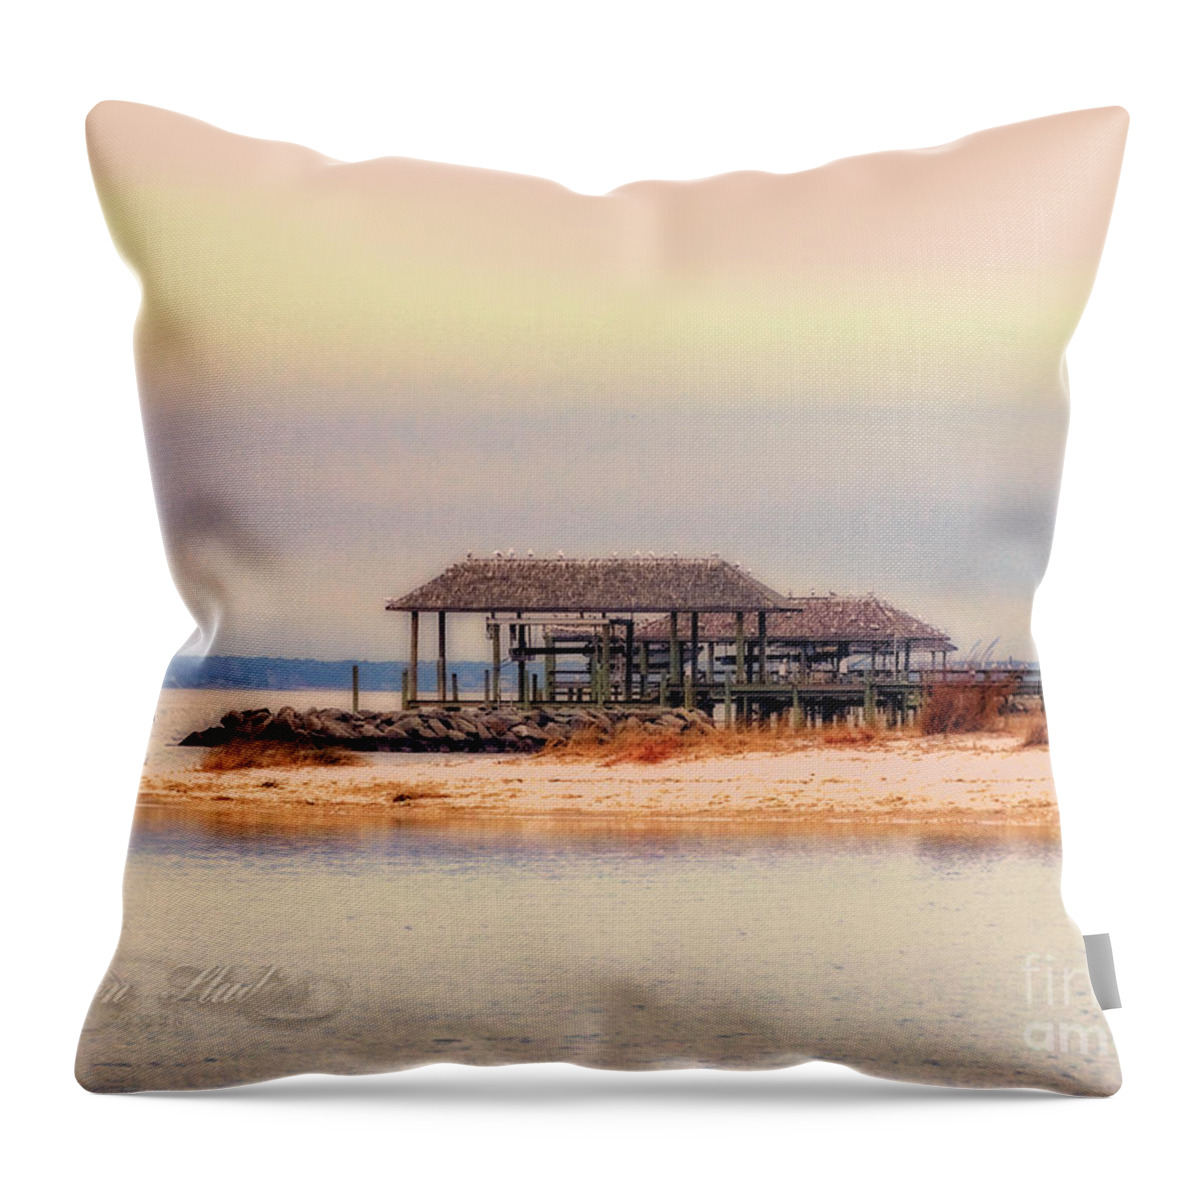 Photoshop Throw Pillow featuring the photograph Dry Dock by Melissa Messick